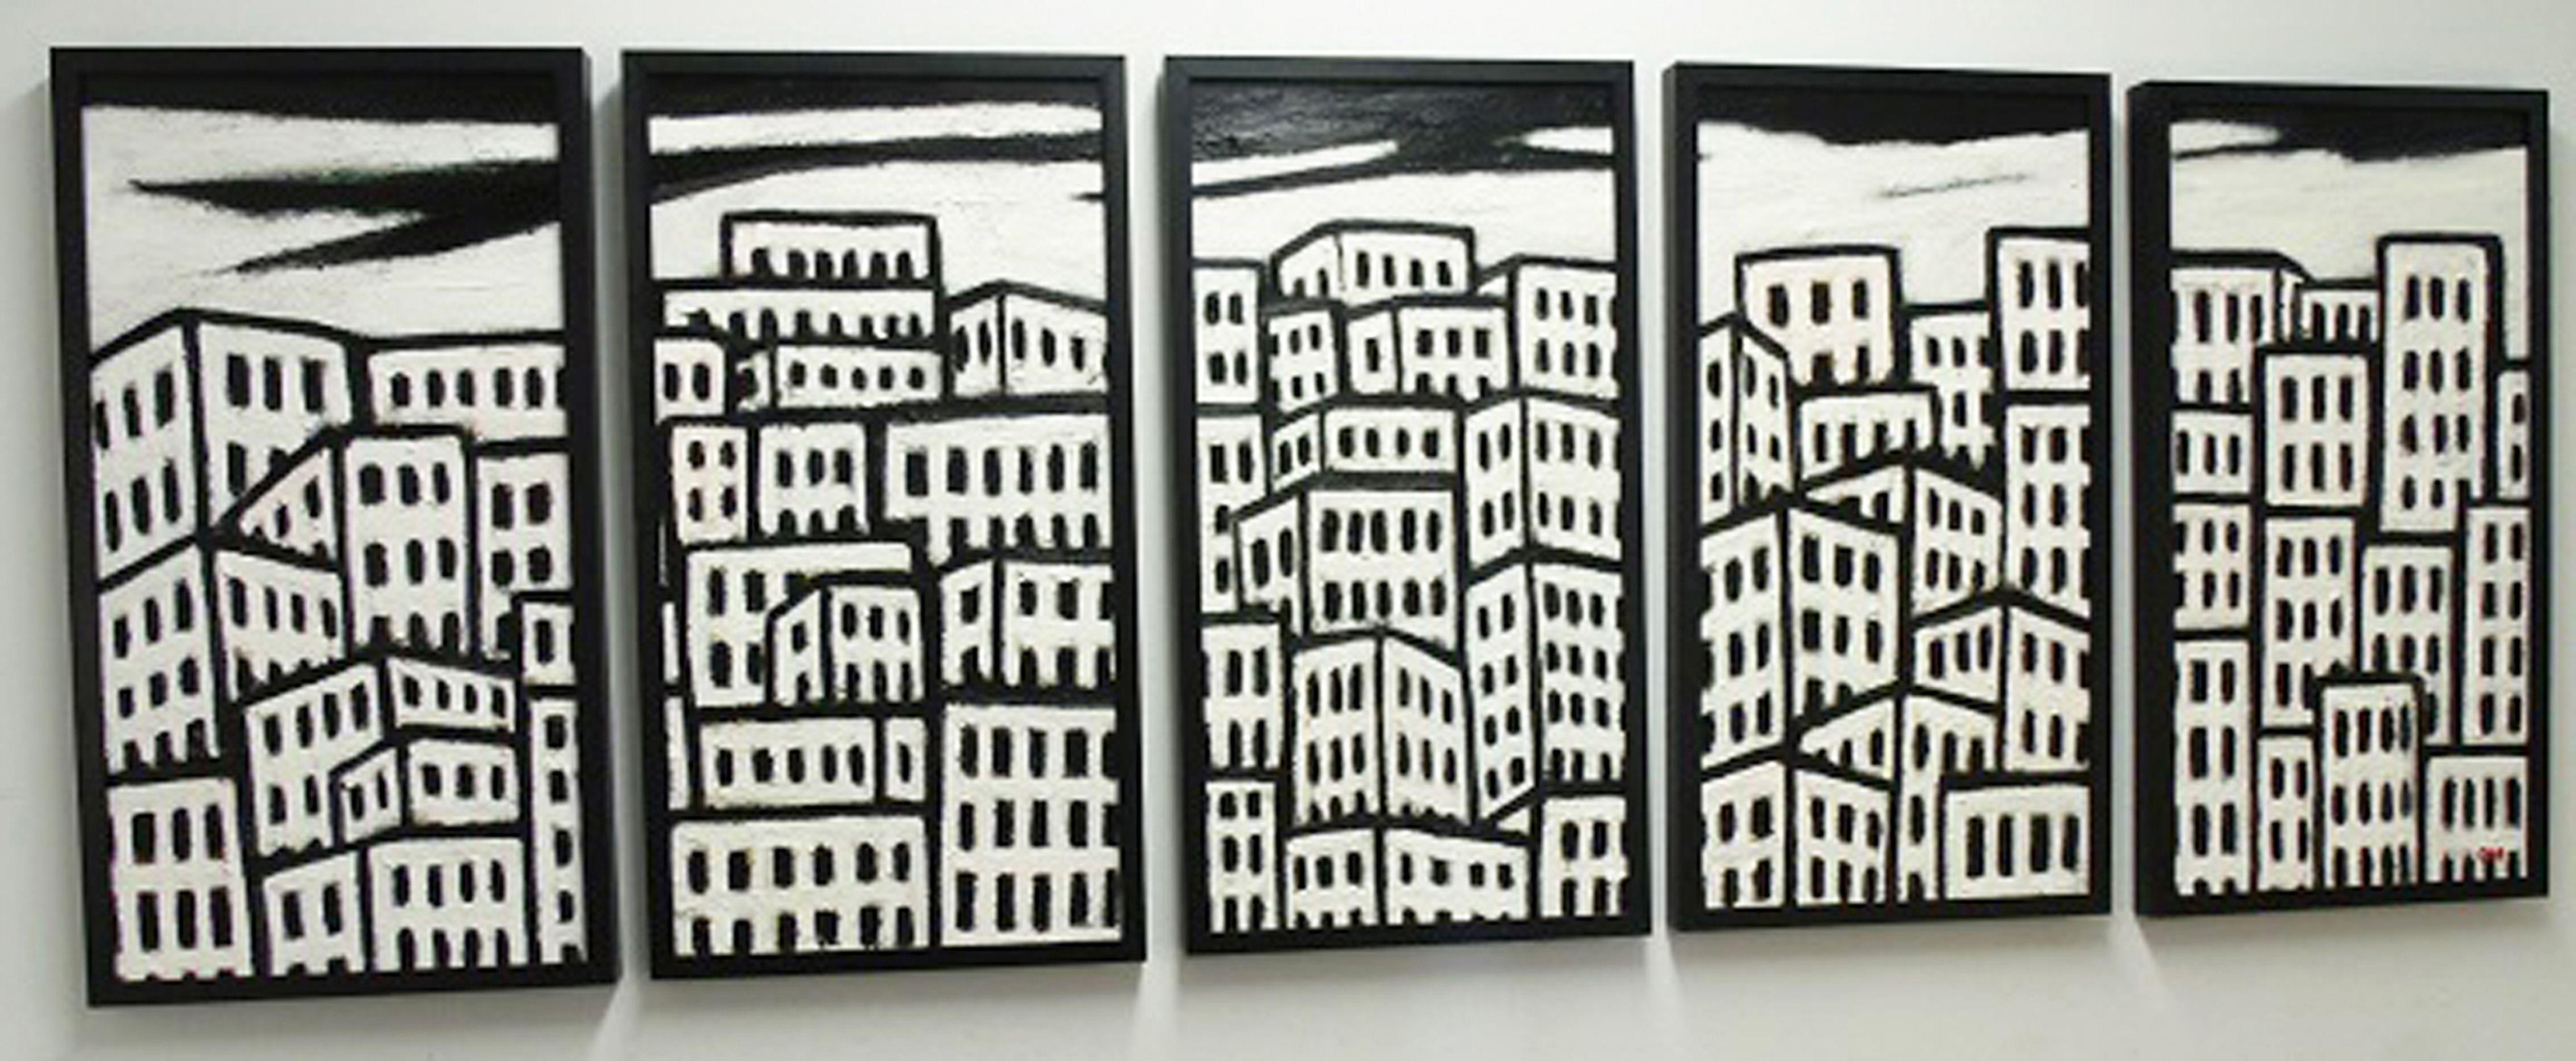 Carl McGrady Abstract Painting - Urban Patterns - 5-panels FREE SHIPPING/Cont. USA, Painting, Oil on Wood Panel